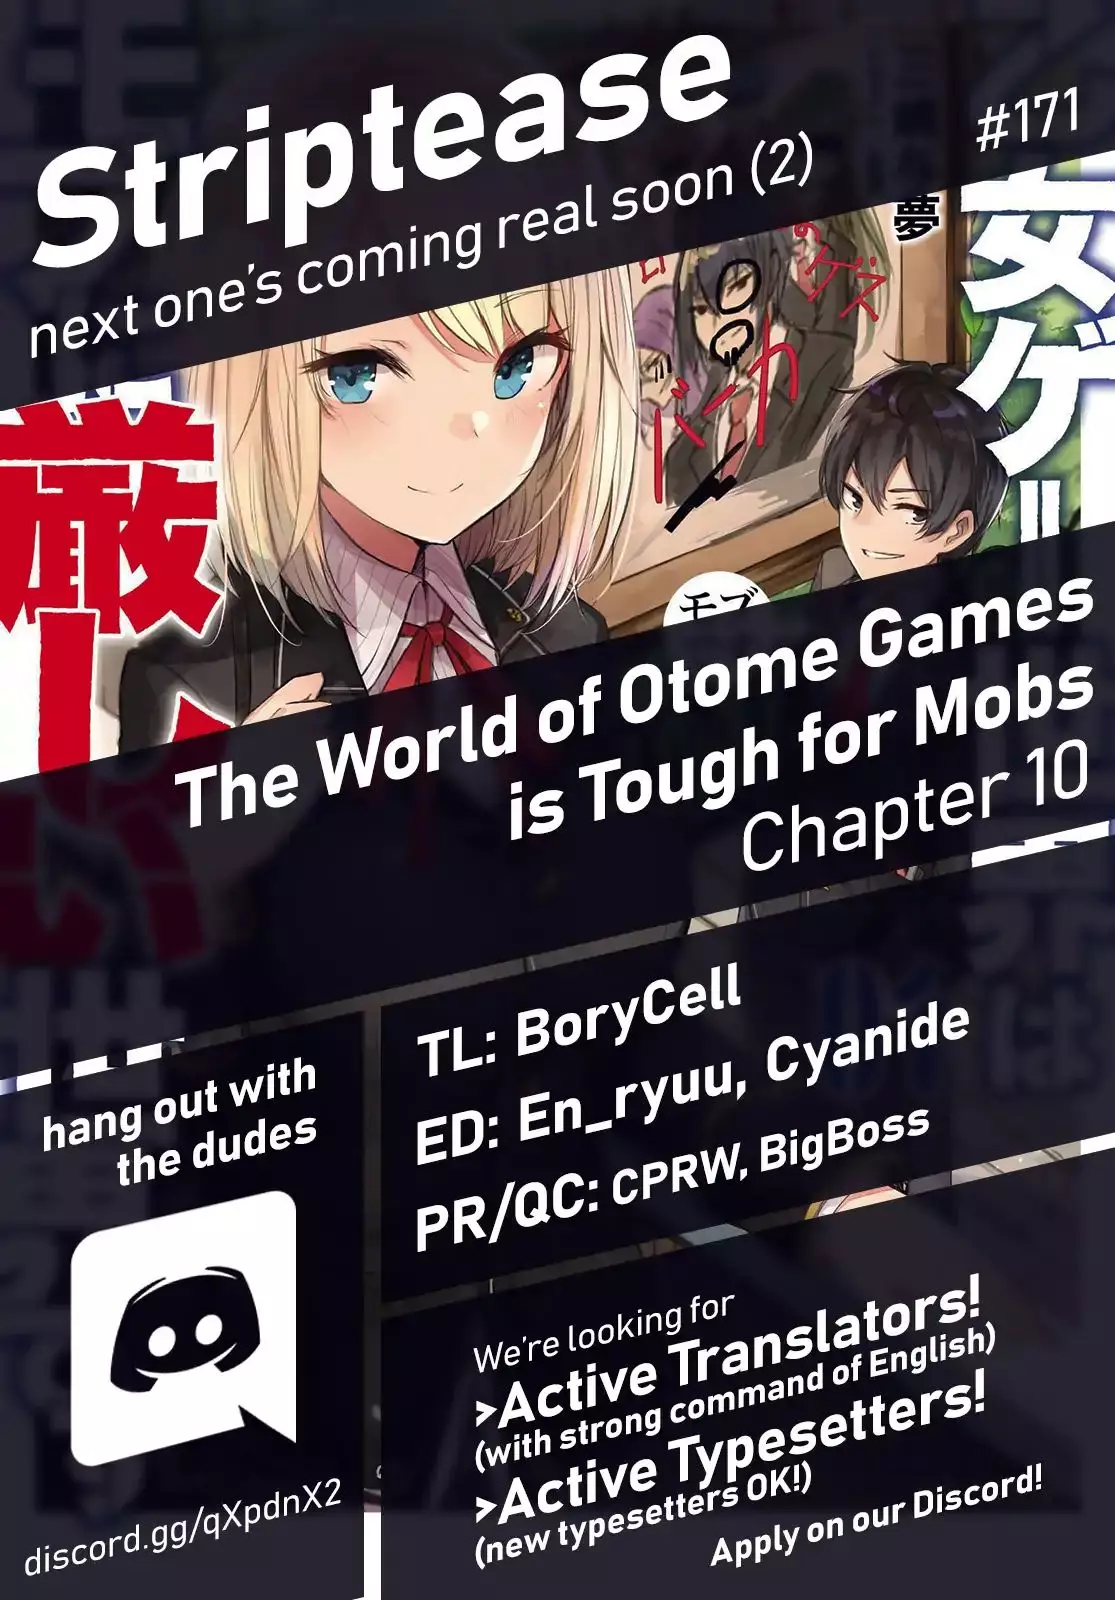 The World Of Otome Games Is Tough For Mobs - 10 page 1